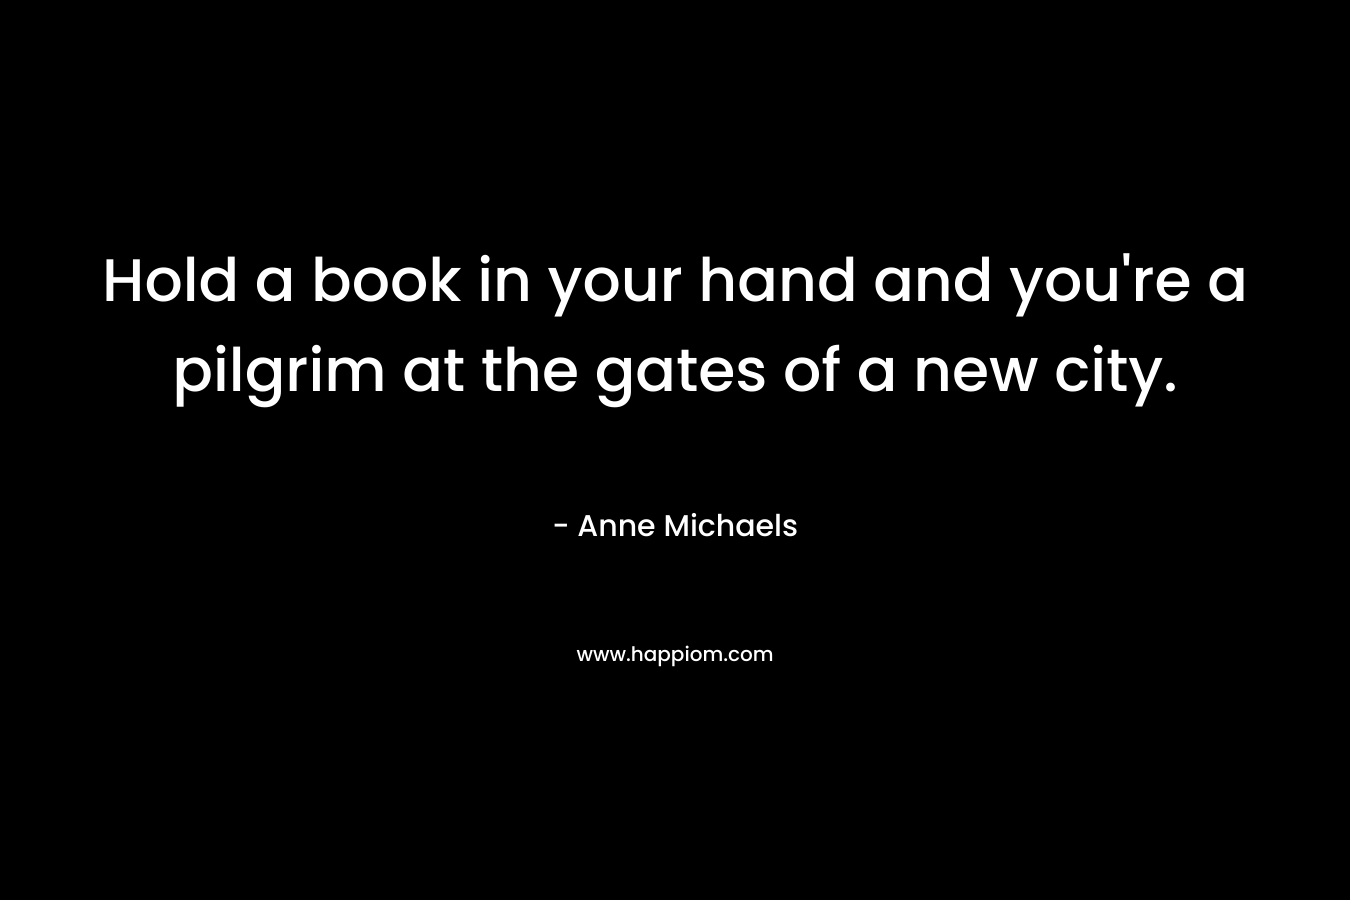 Hold a book in your hand and you’re a pilgrim at the gates of a new city. – Anne Michaels